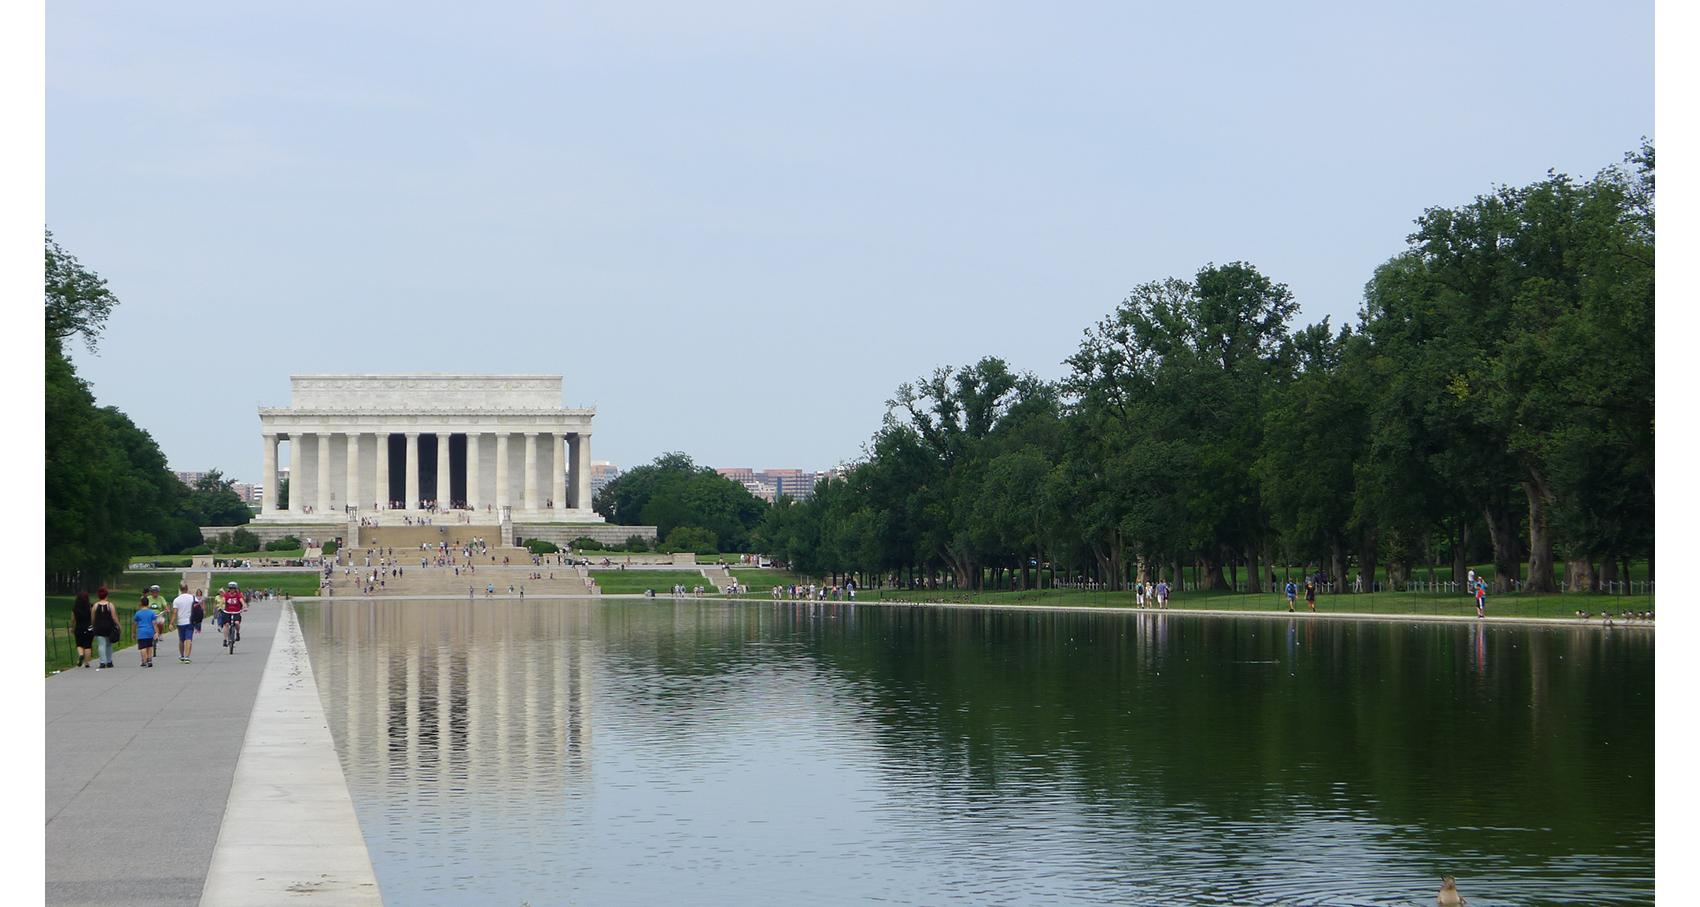 Lincoln Memorial Reflecting Pool | Bargmann Hendrie + Archetype, Inc.